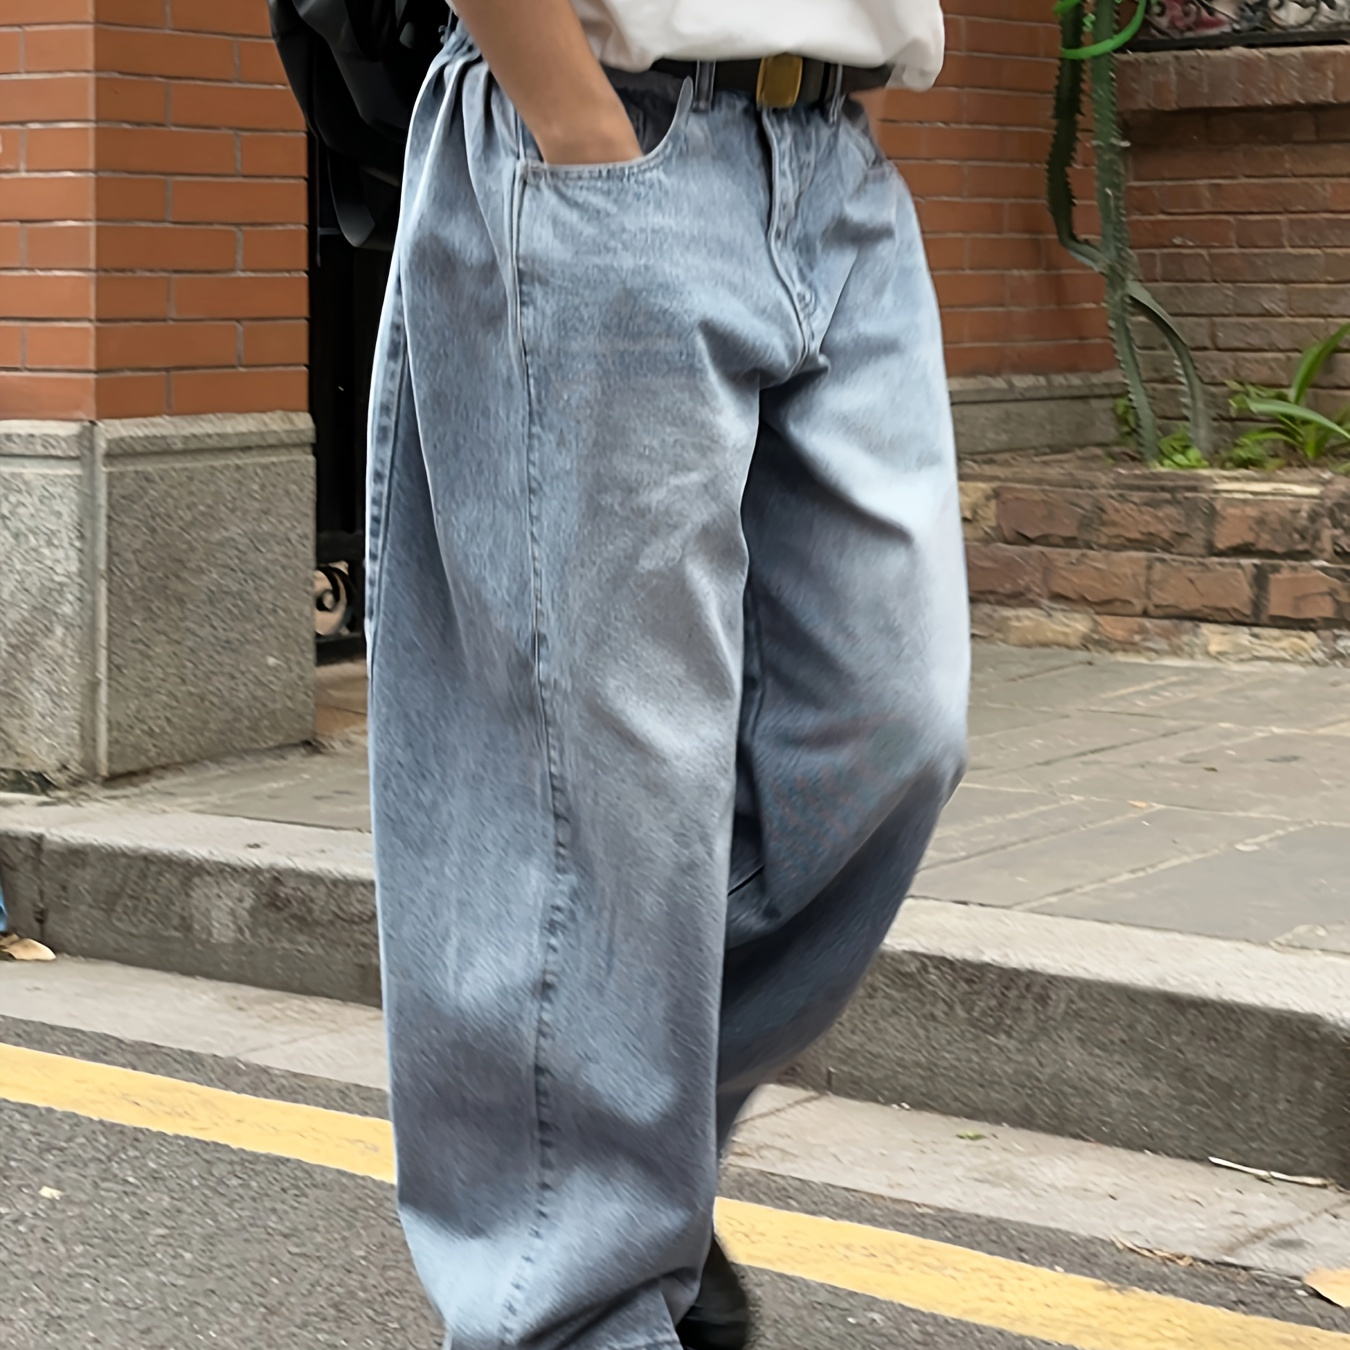 

Men's Stylish Loose Fit Wide Leg Washed Denim Jeans, Casual Street Style Denim Pants For Casual Daily Wear, Fluid Pants